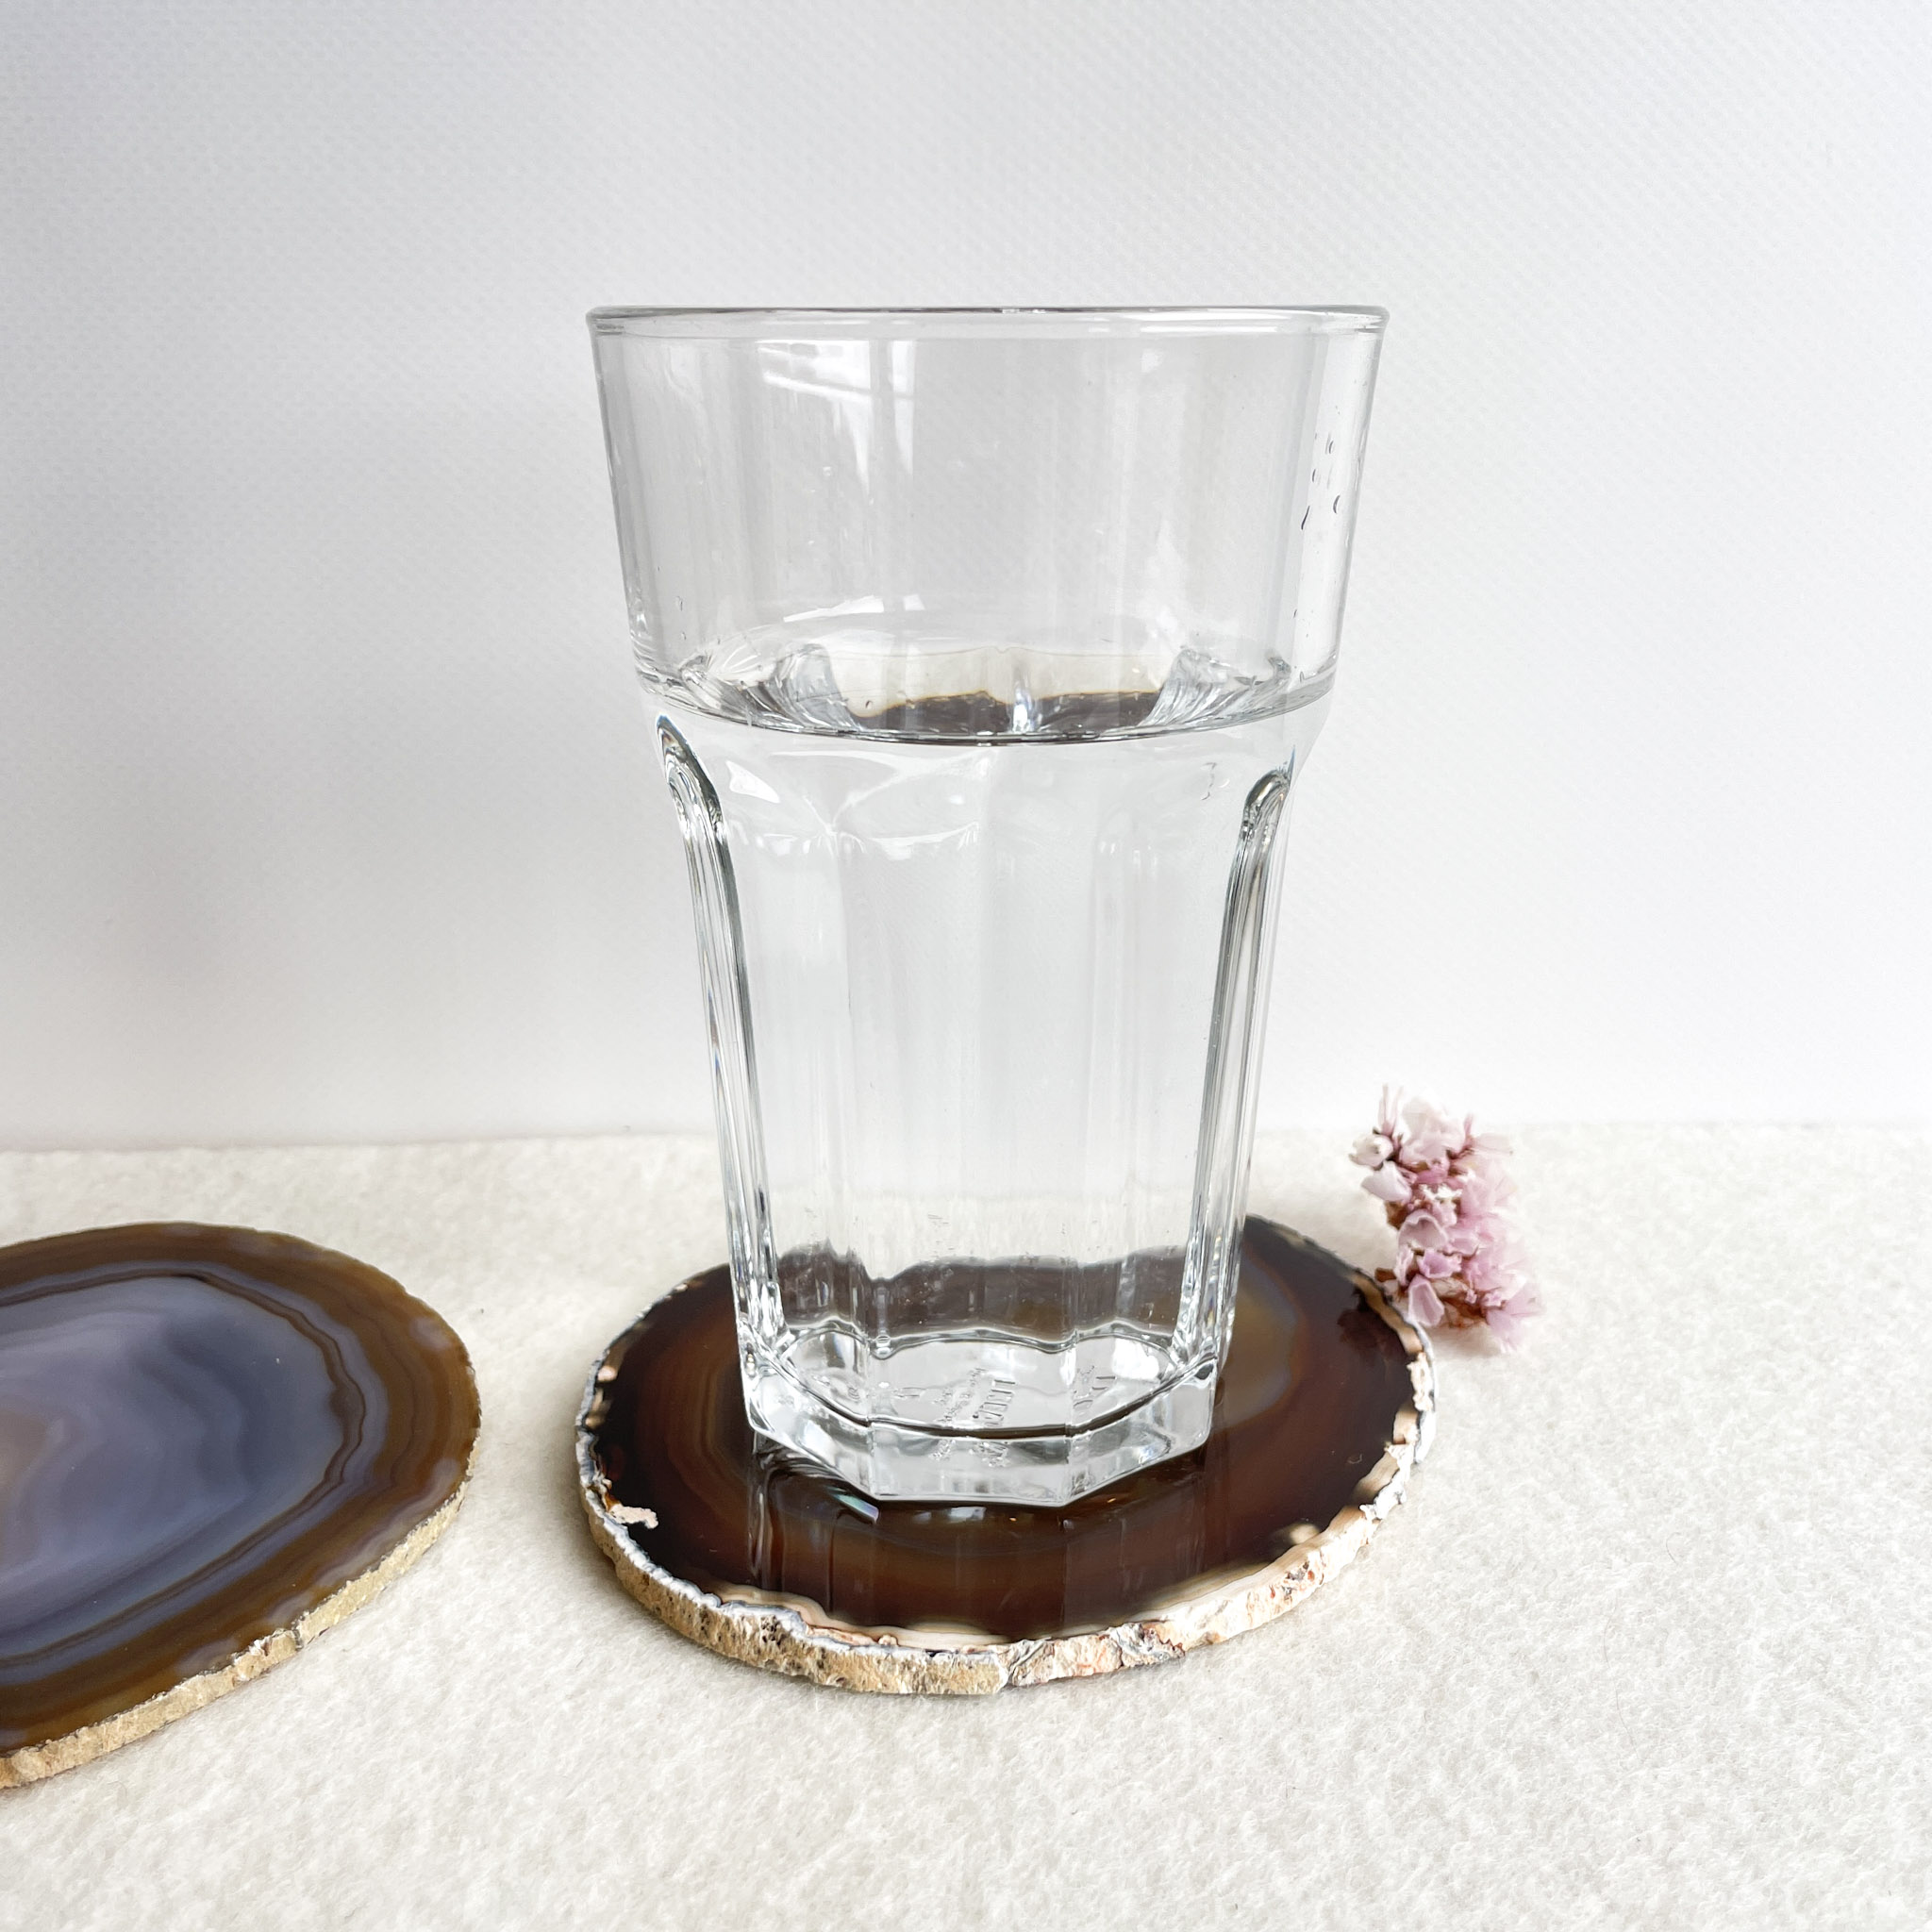 A half-full clear glass of water sitting on an agate coaster next to another similar coaster and a small pink flower on a textured white surface.